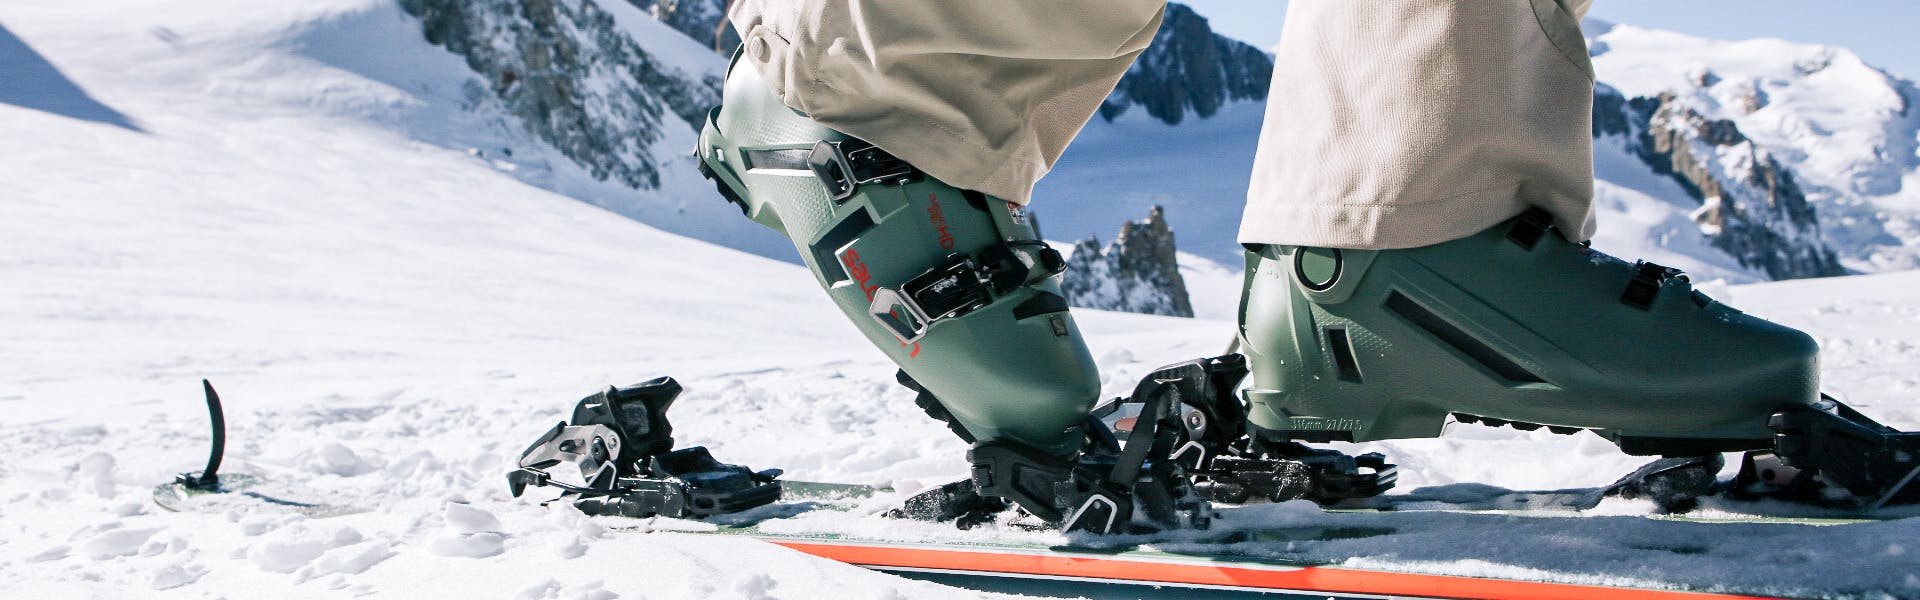 Salomon Shift: The Most Binding on the Market Curated.com